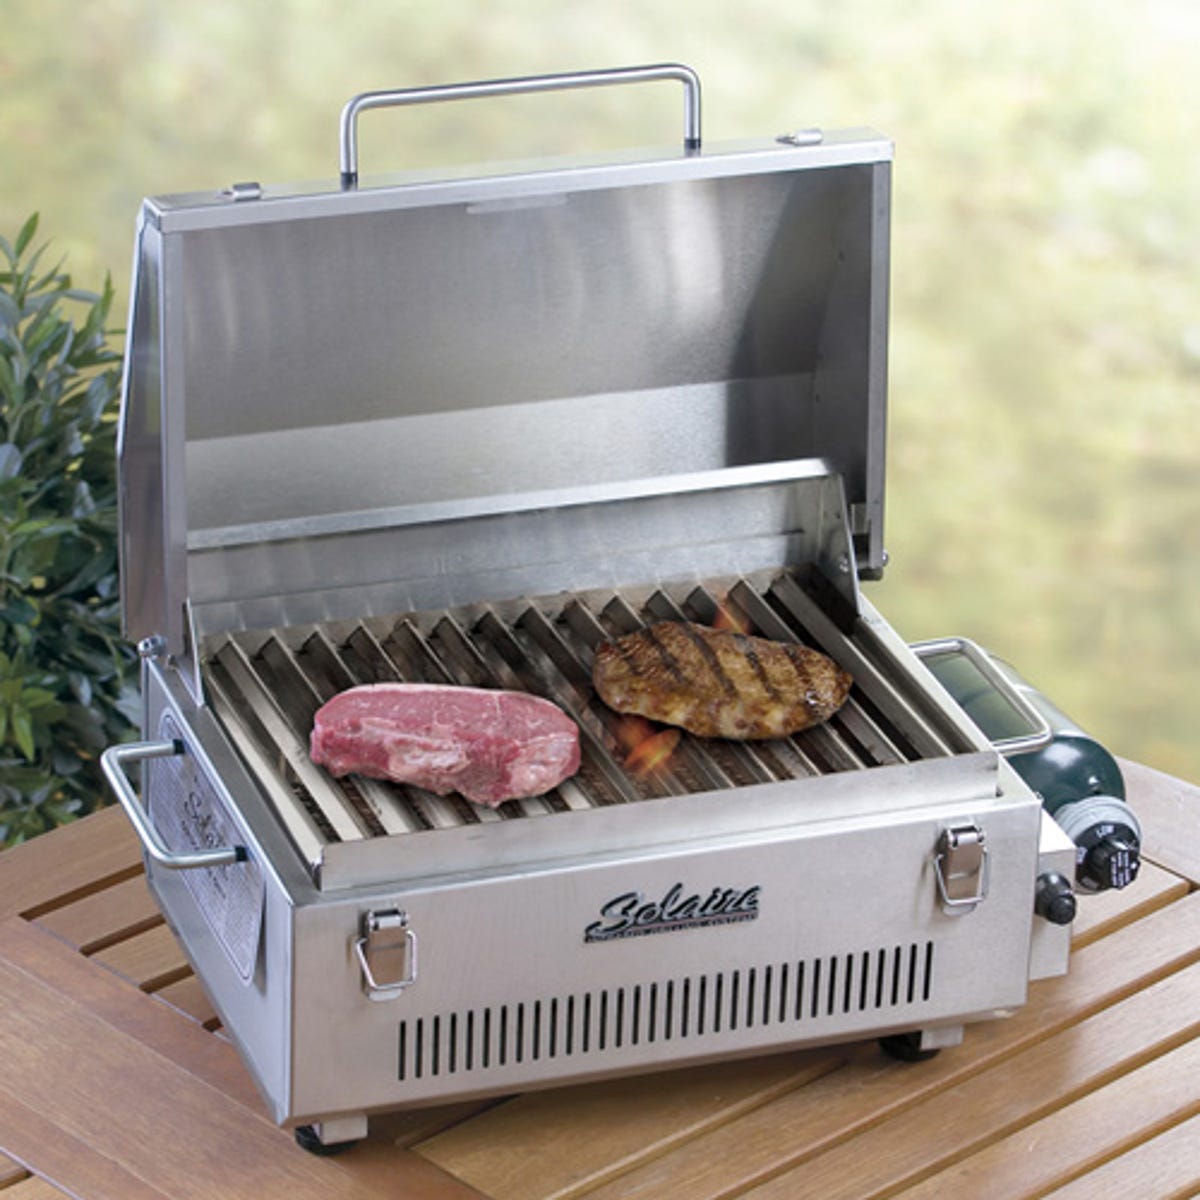 The most popular grilling products on  - CNET